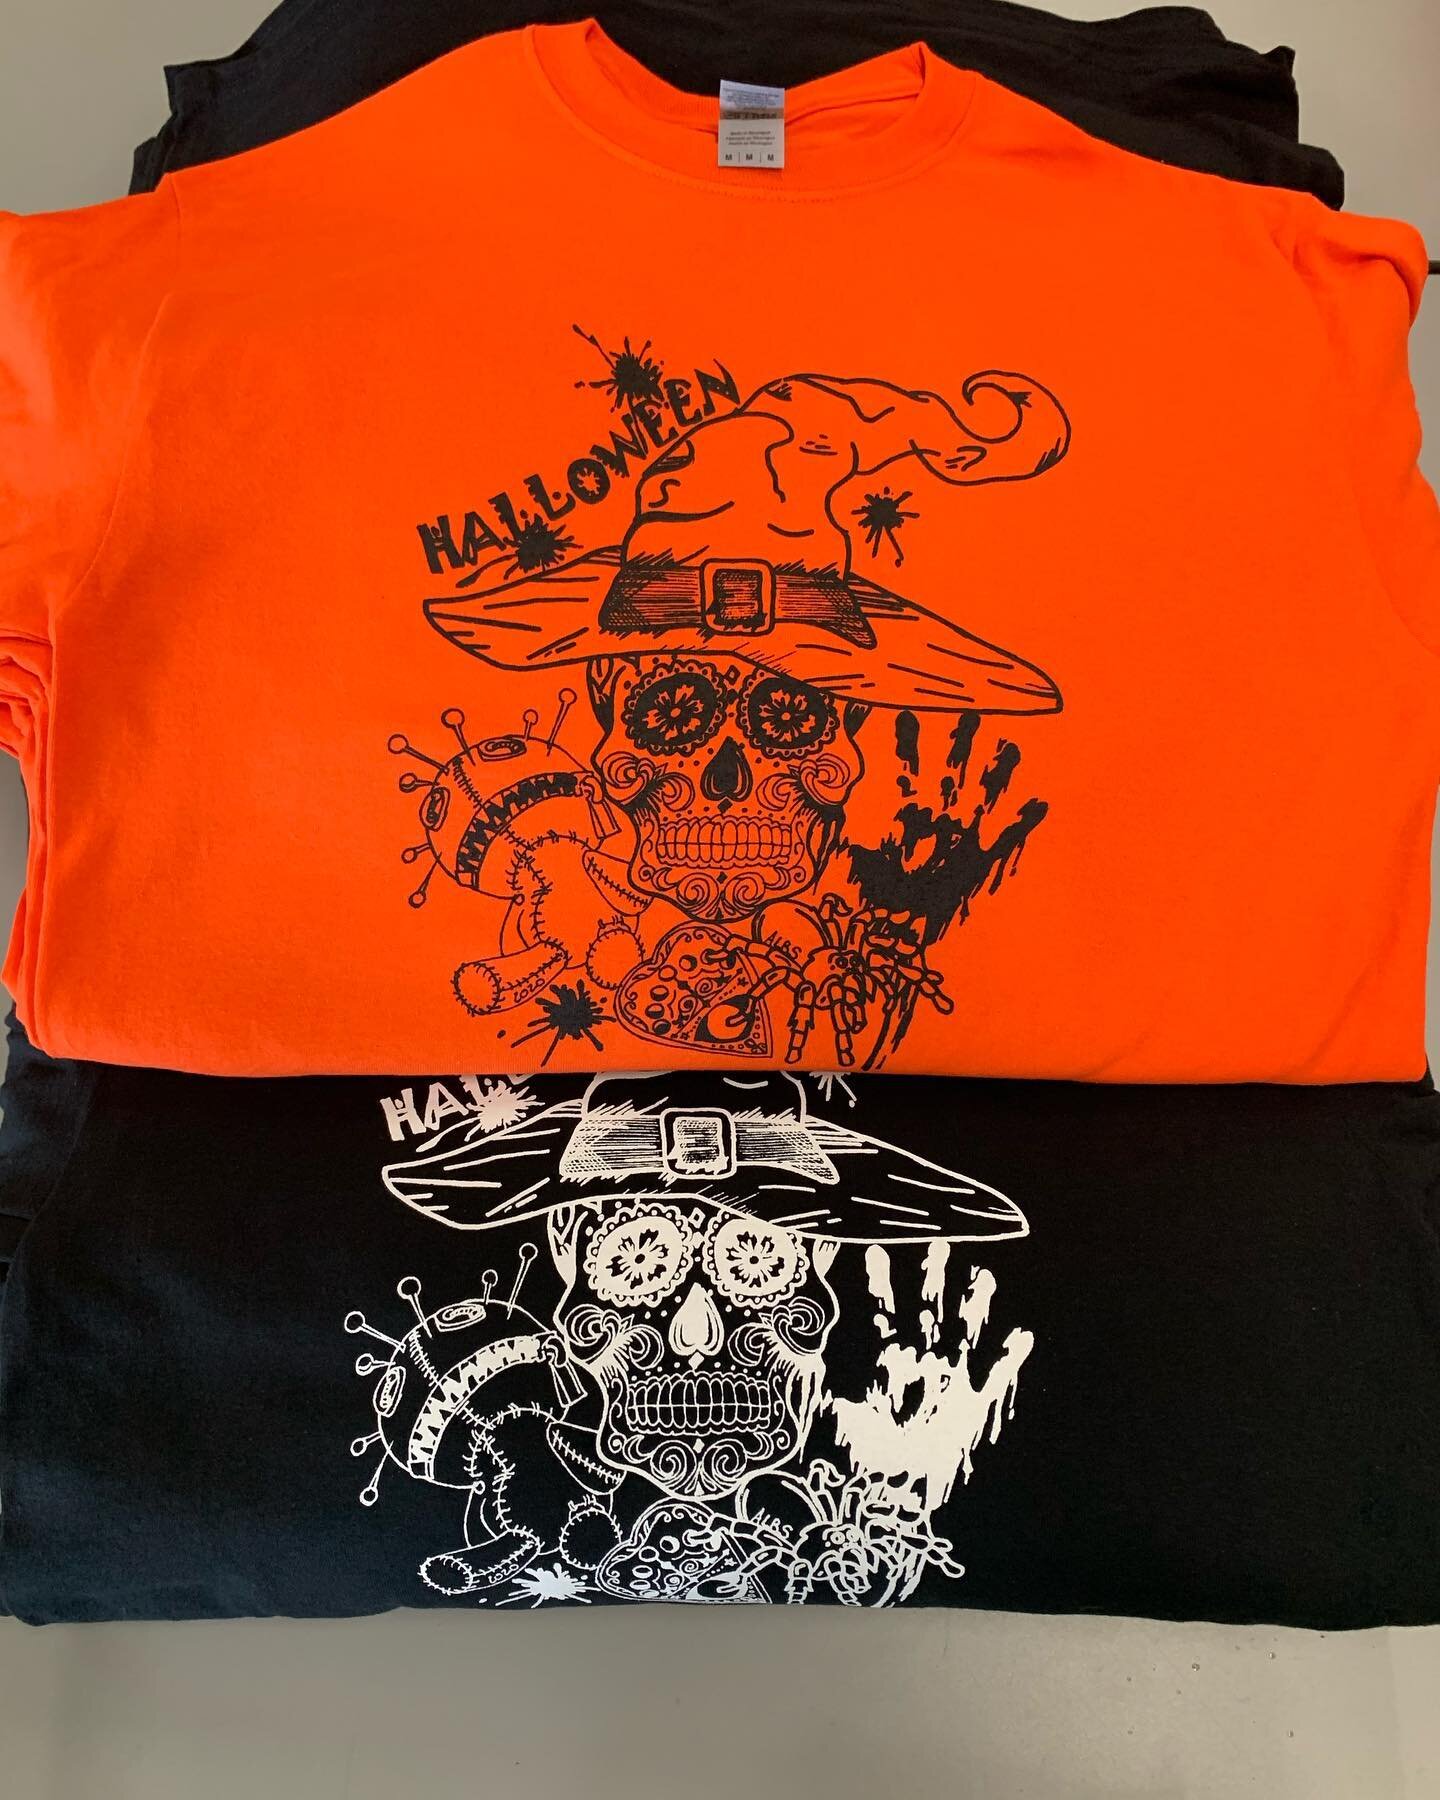 Getting into the Halloween spirit around here🎃 Printed this spooky design for local artist @labsbysmall 

#kinstonnc #magicmilescreenprintingco #madeinKinston #spooky